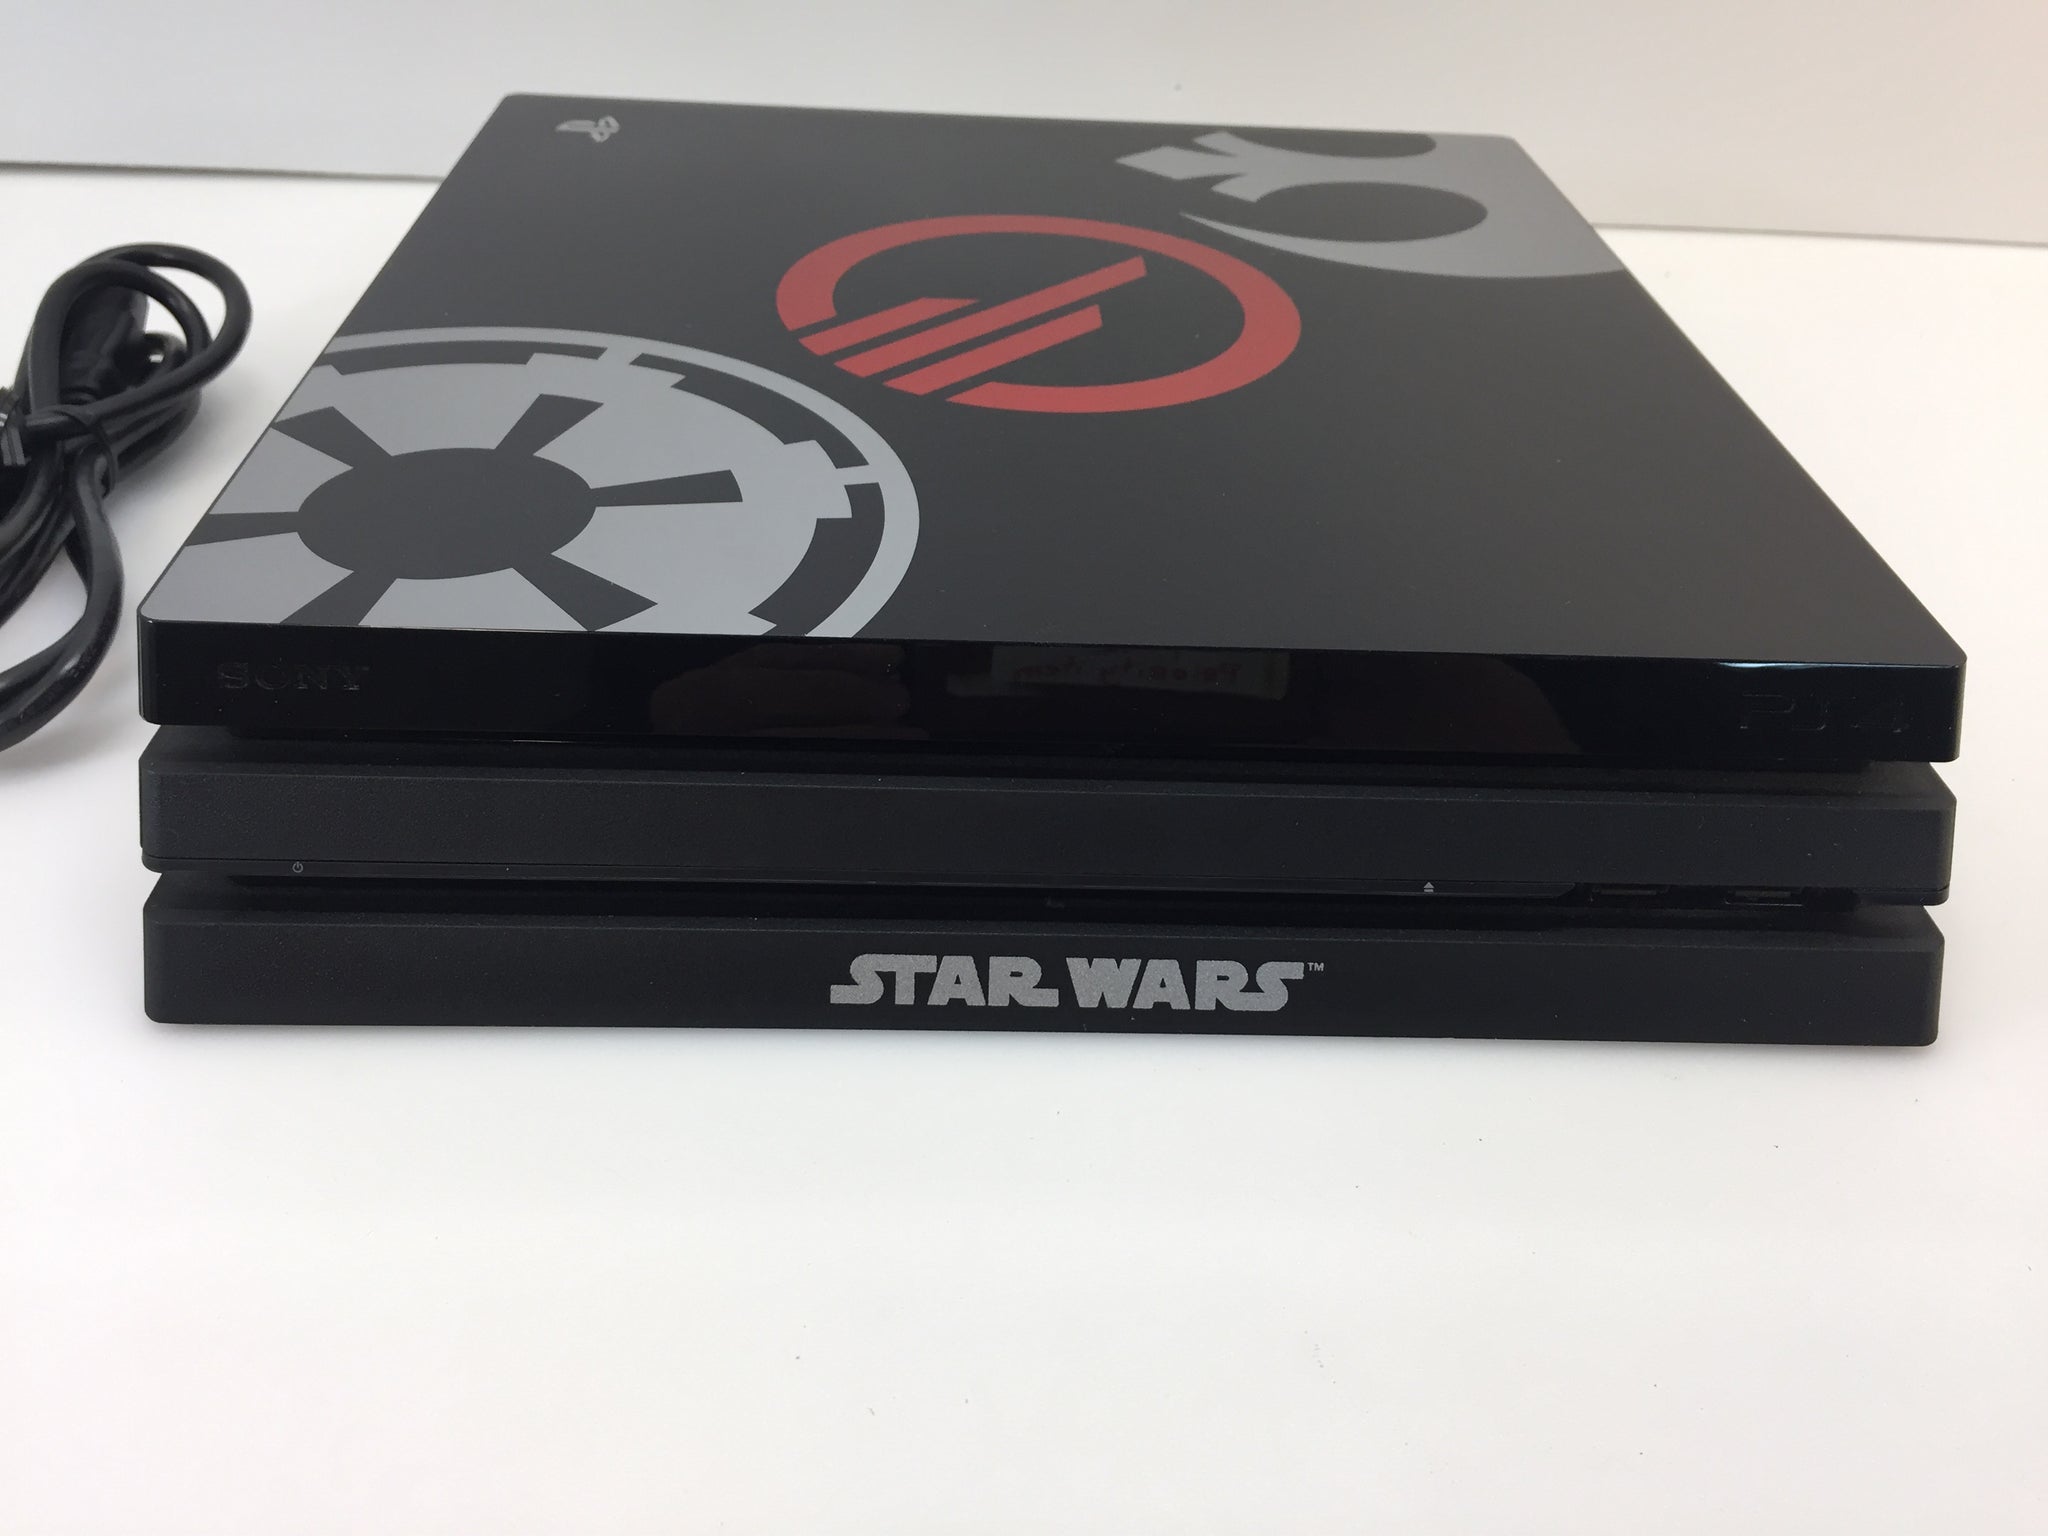 Console Sony Playstation 4 Pro Star Wars BattleFront 2 Special Edition -  Passaros Games